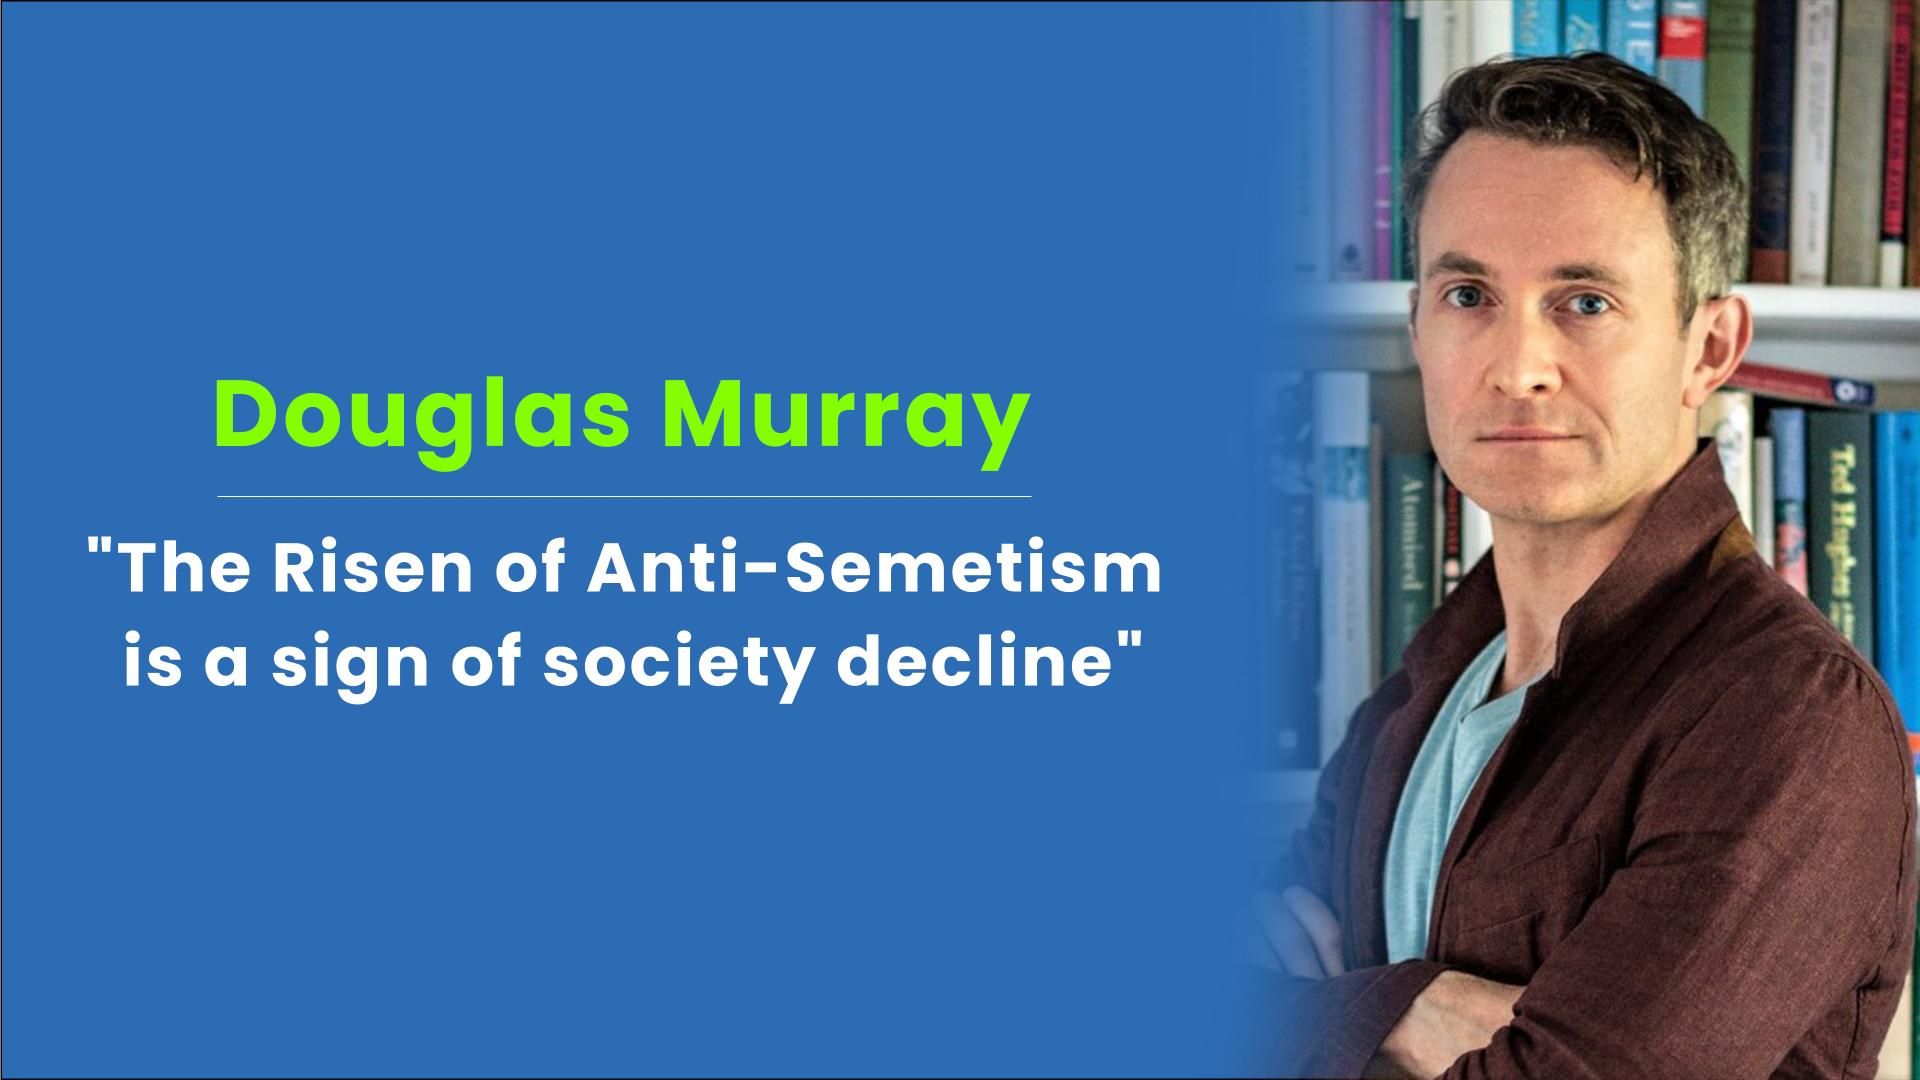 Douglas Murray "The Risen of Anti-Semetism is a sign of society decline"